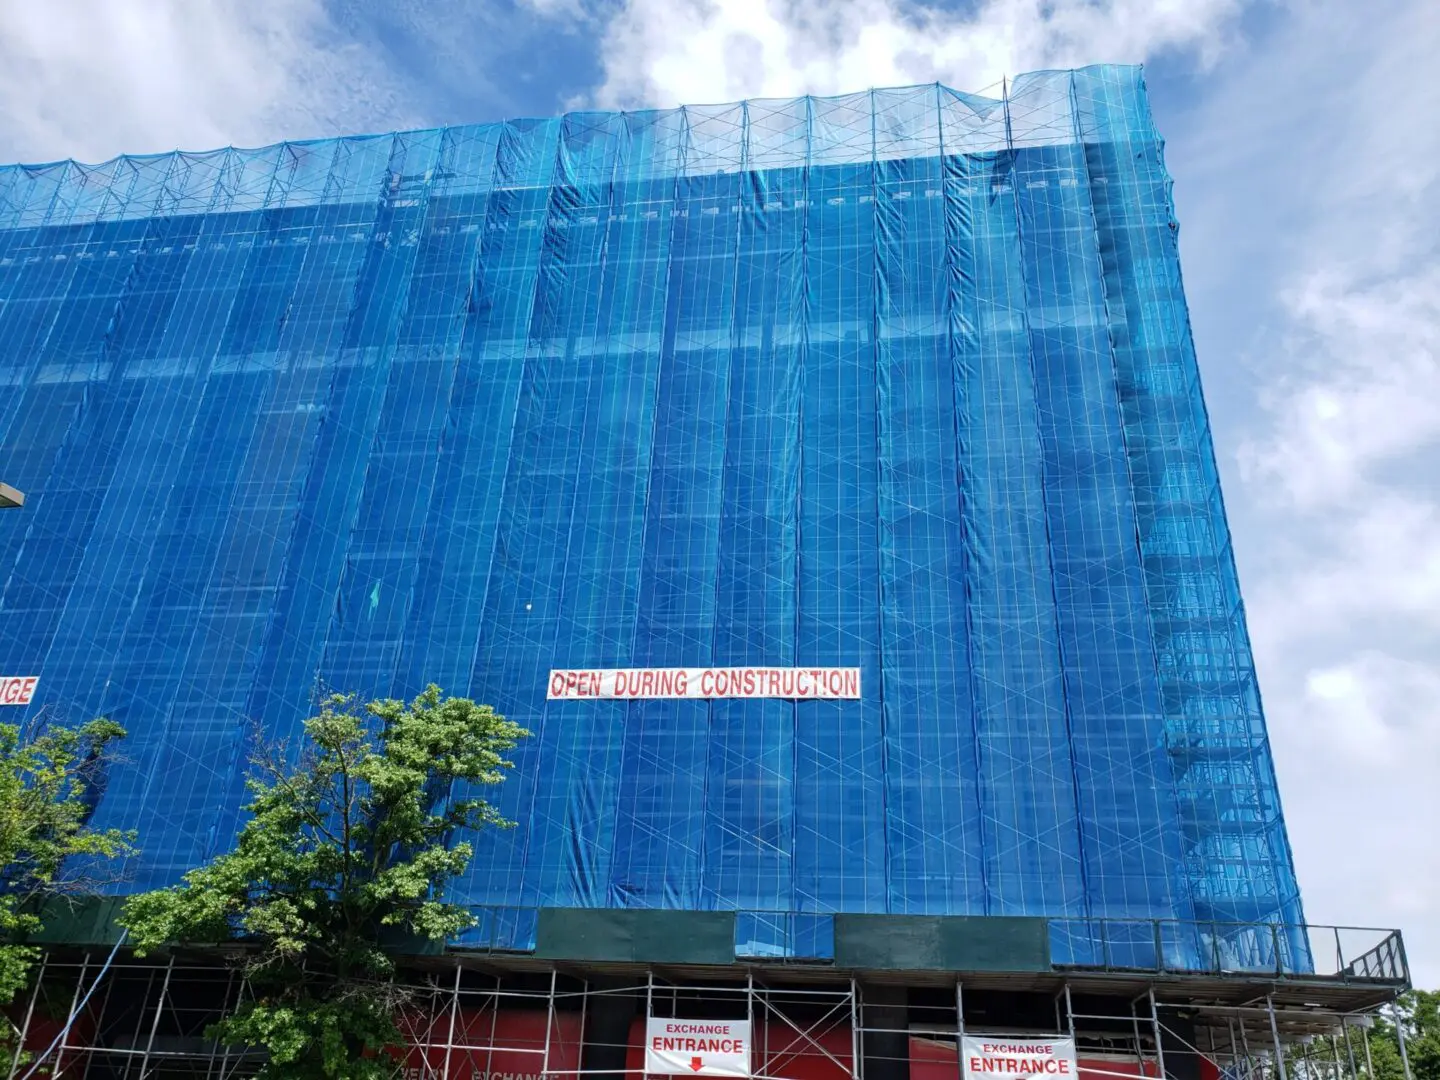 A commercial building being constructed